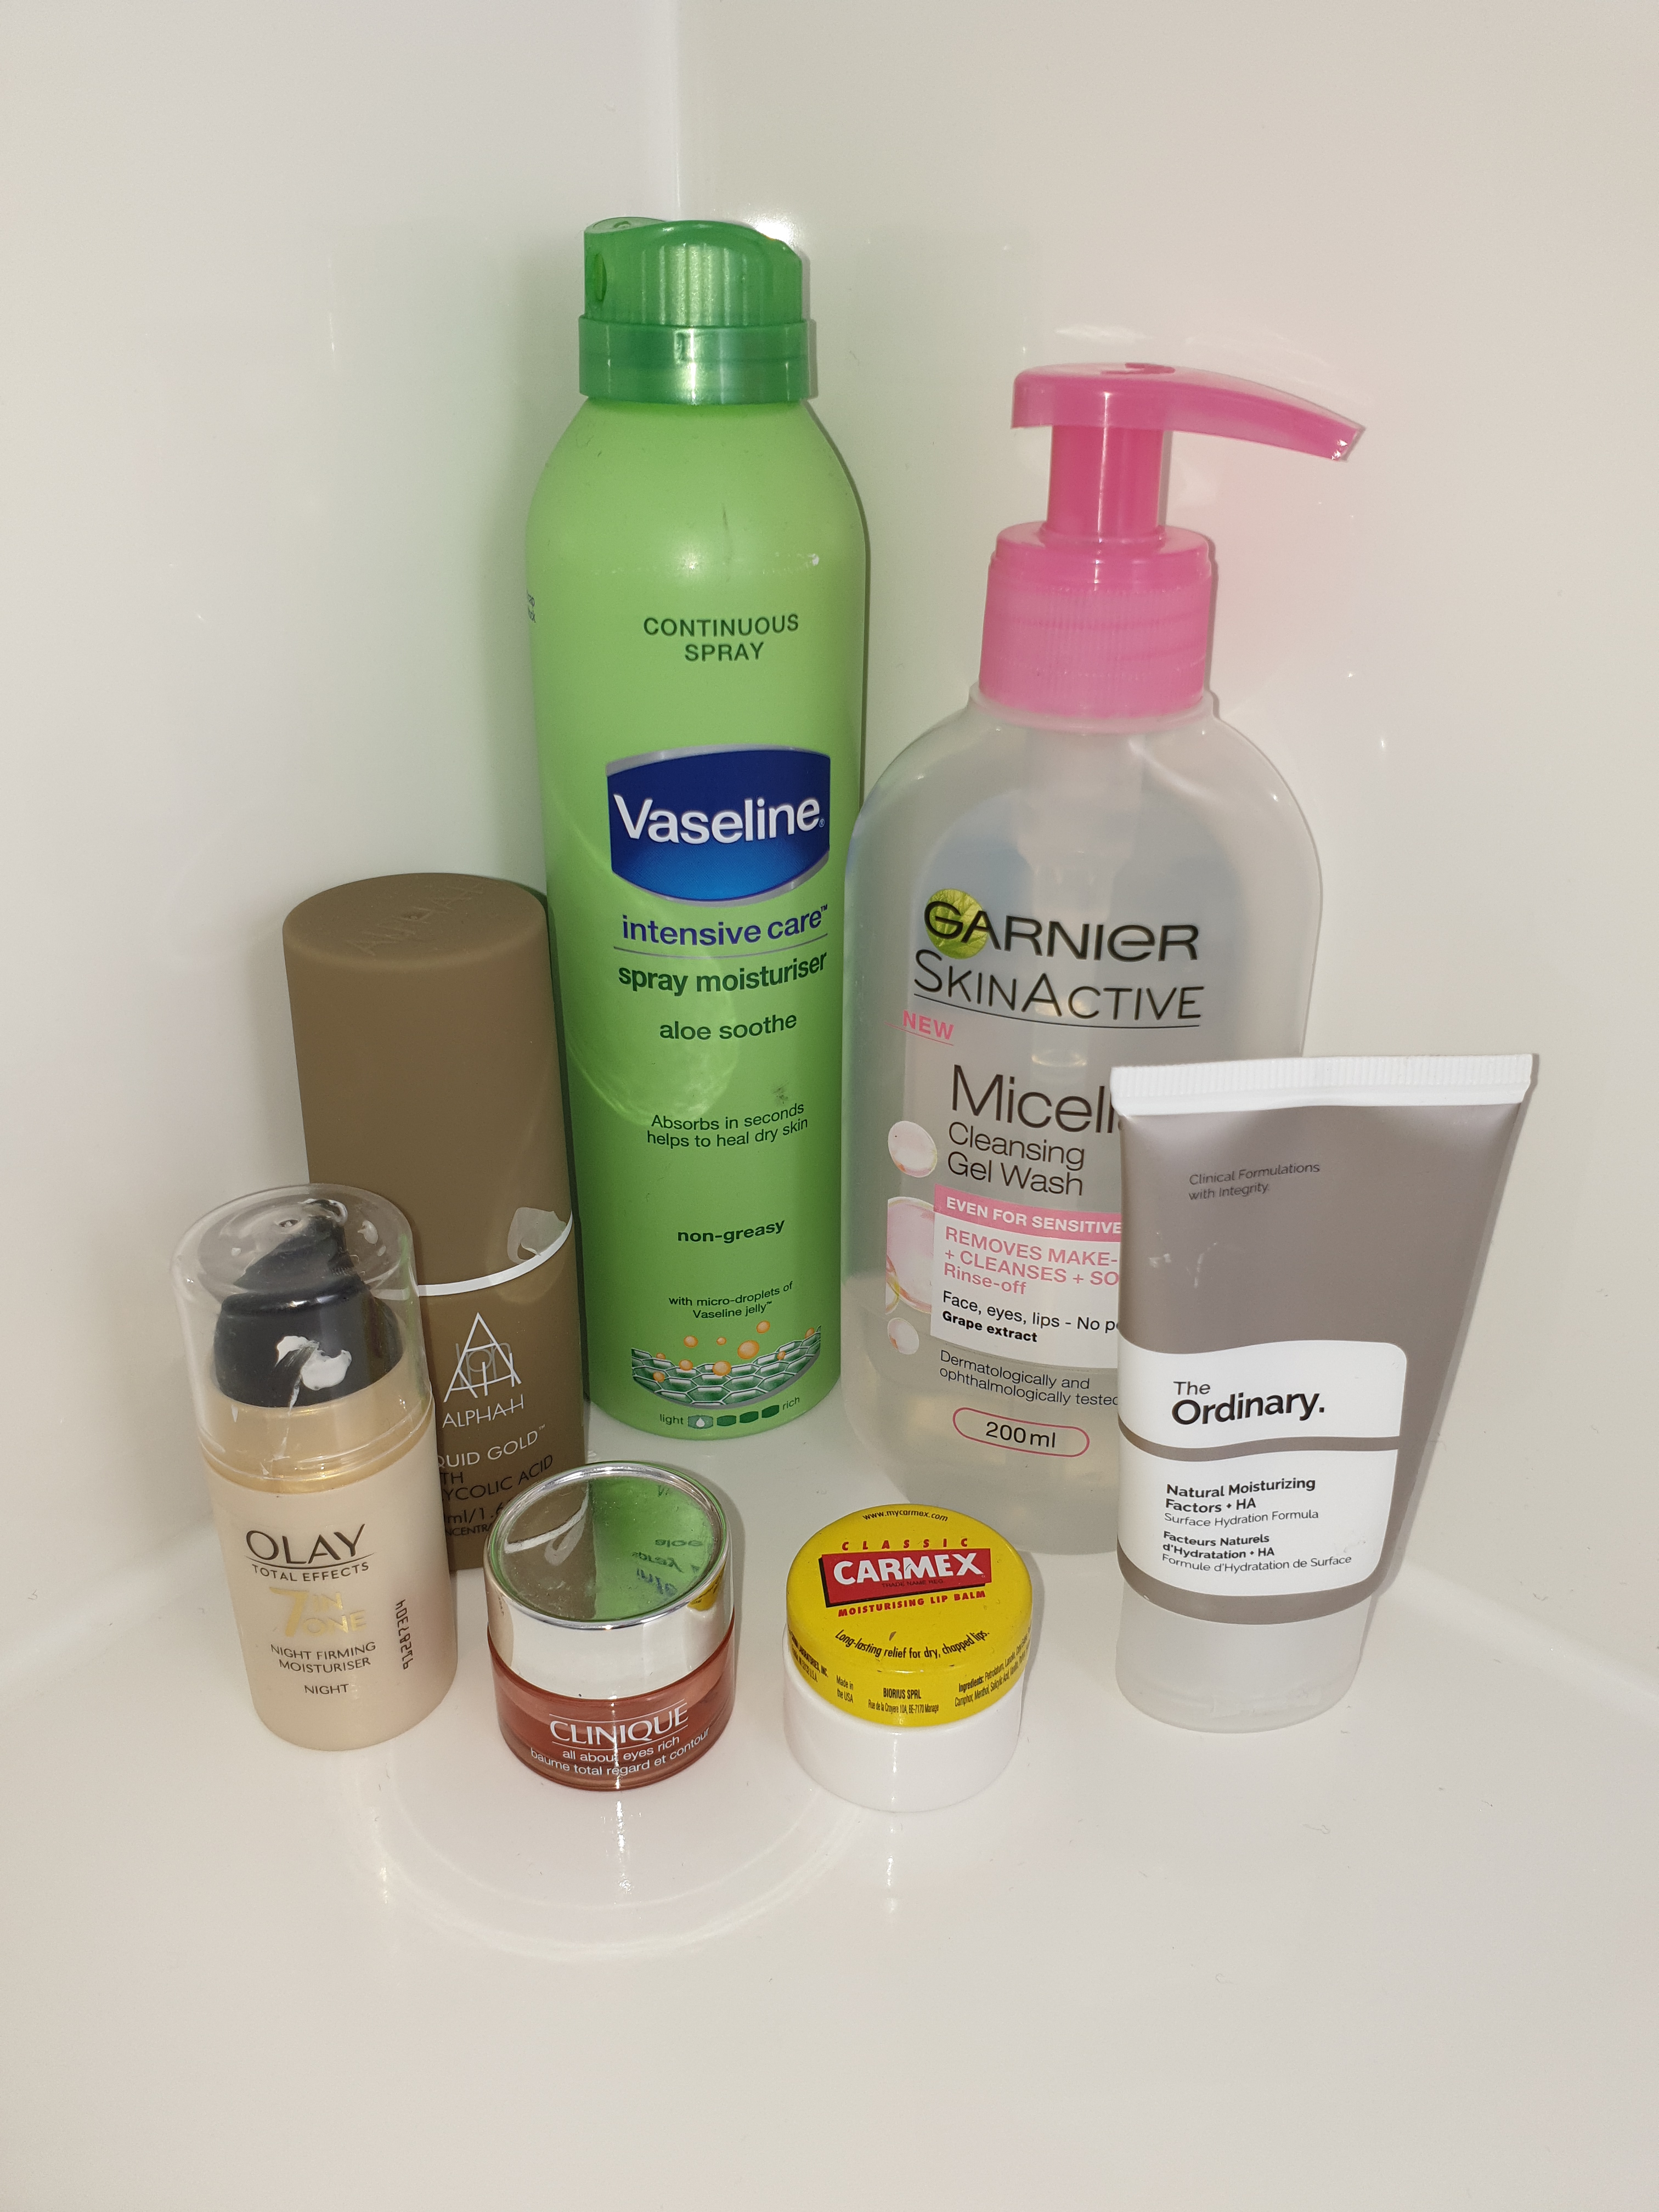 My current skincare routine products